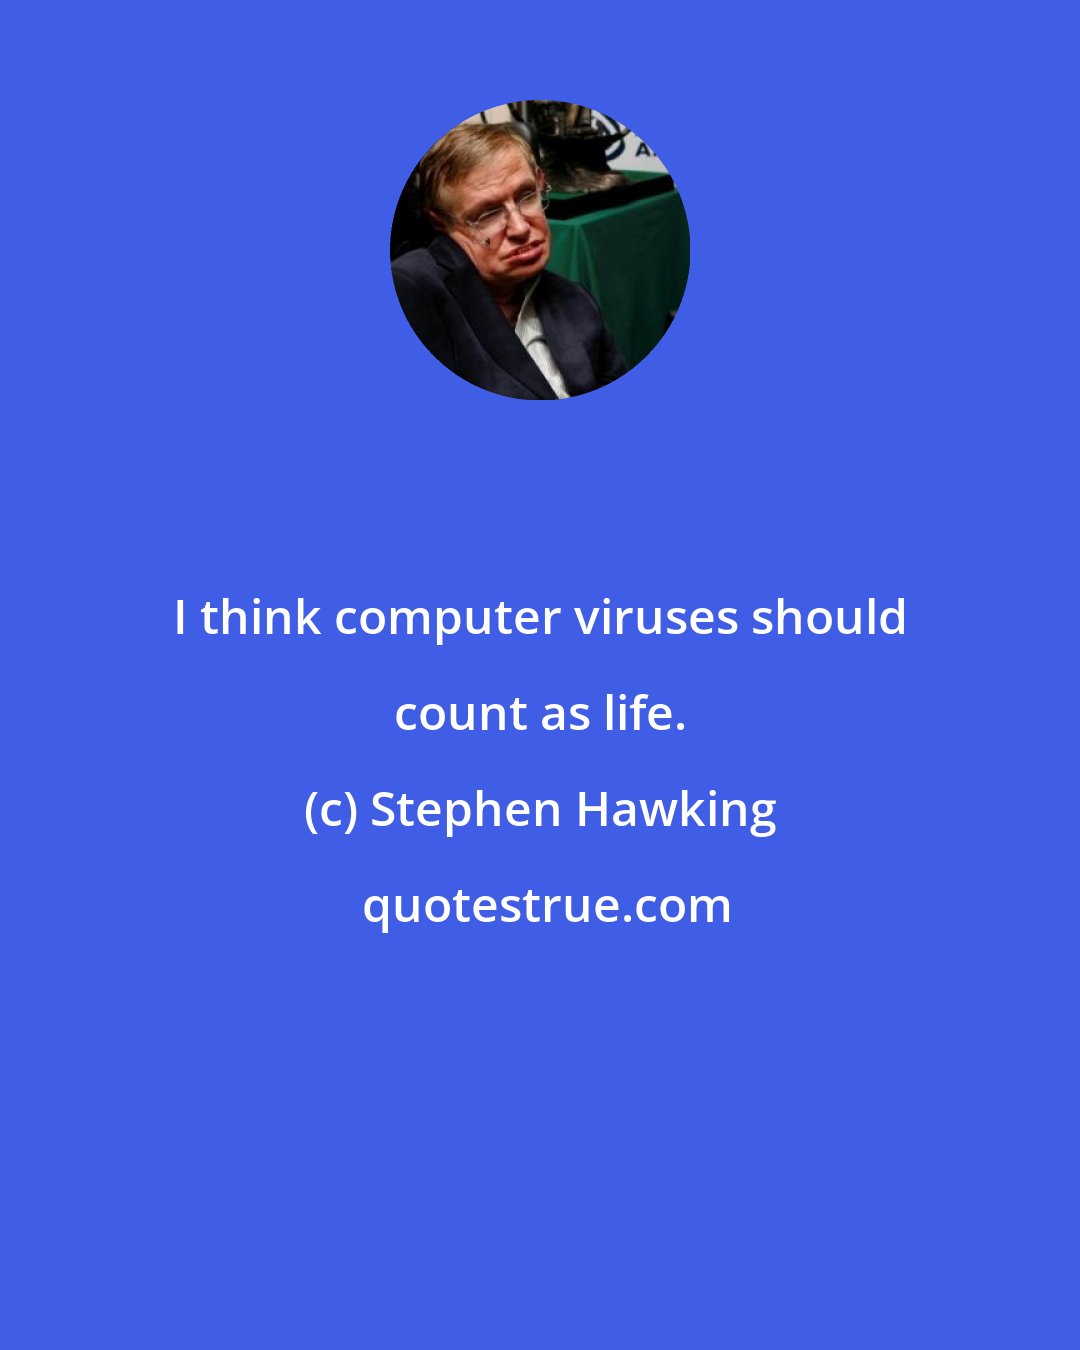 Stephen Hawking: I think computer viruses should count as life.